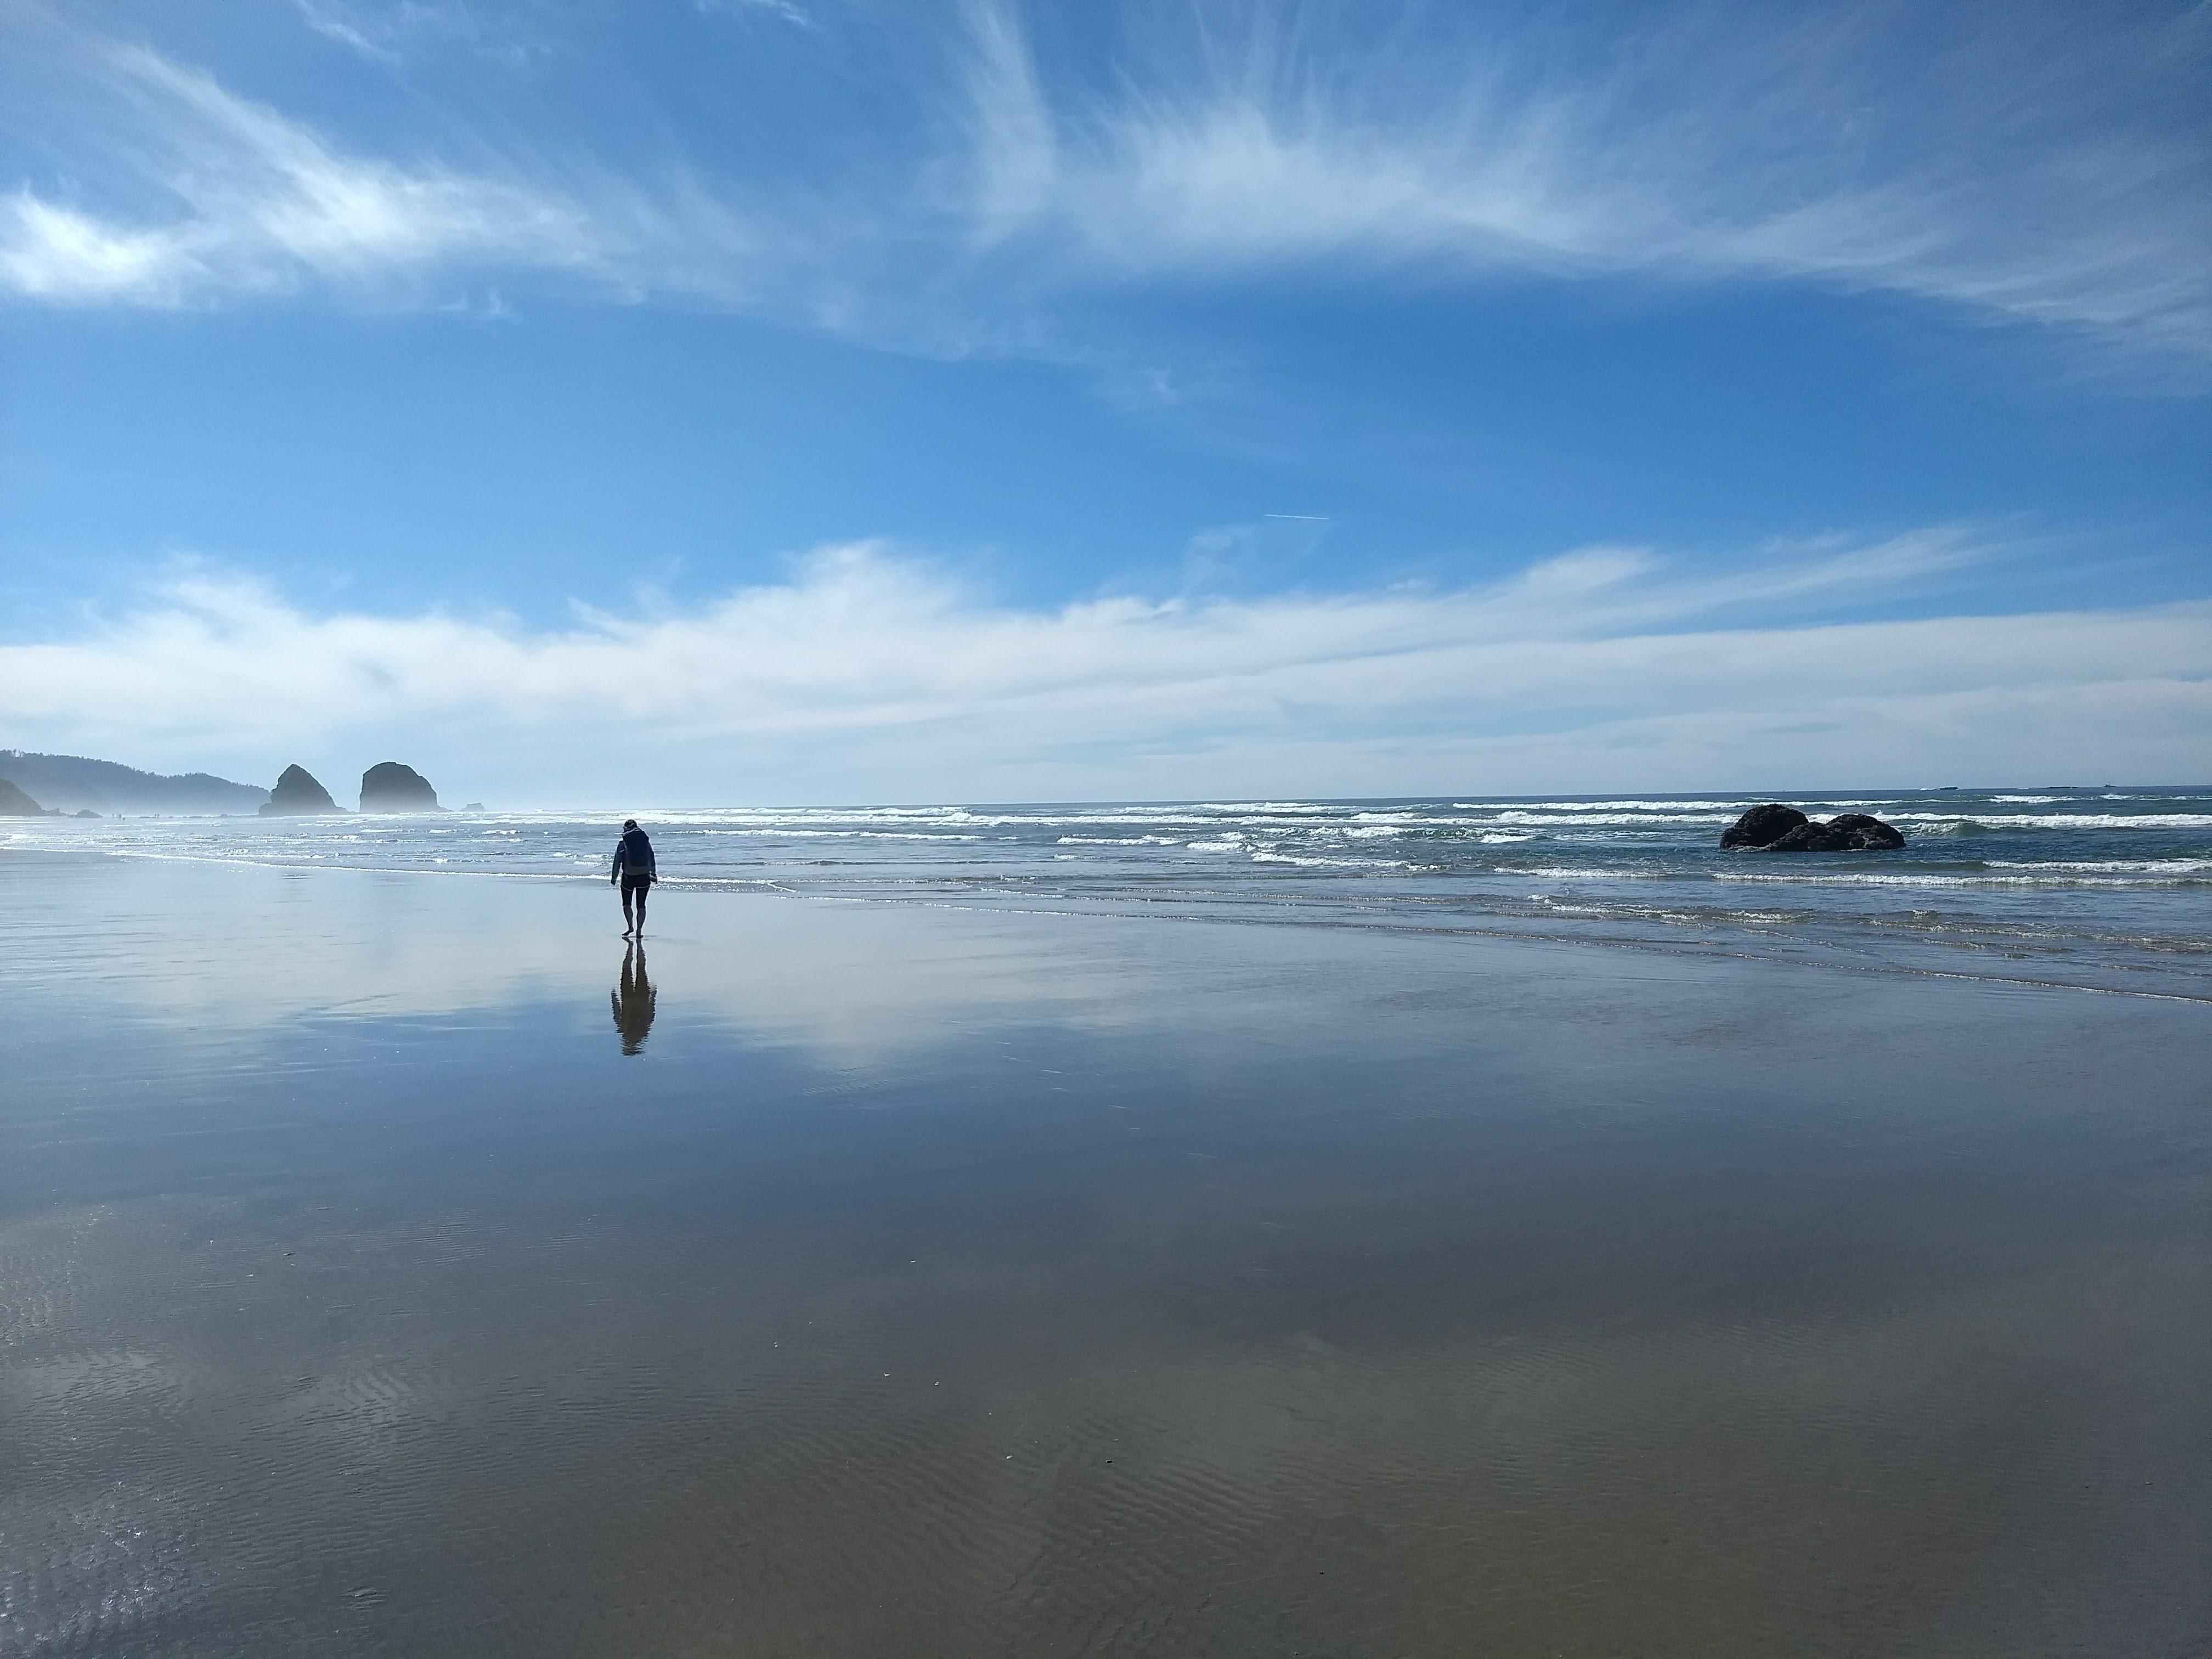 The Oregon Coast Trail: The Best, Biggest Beach Walk of Your Life